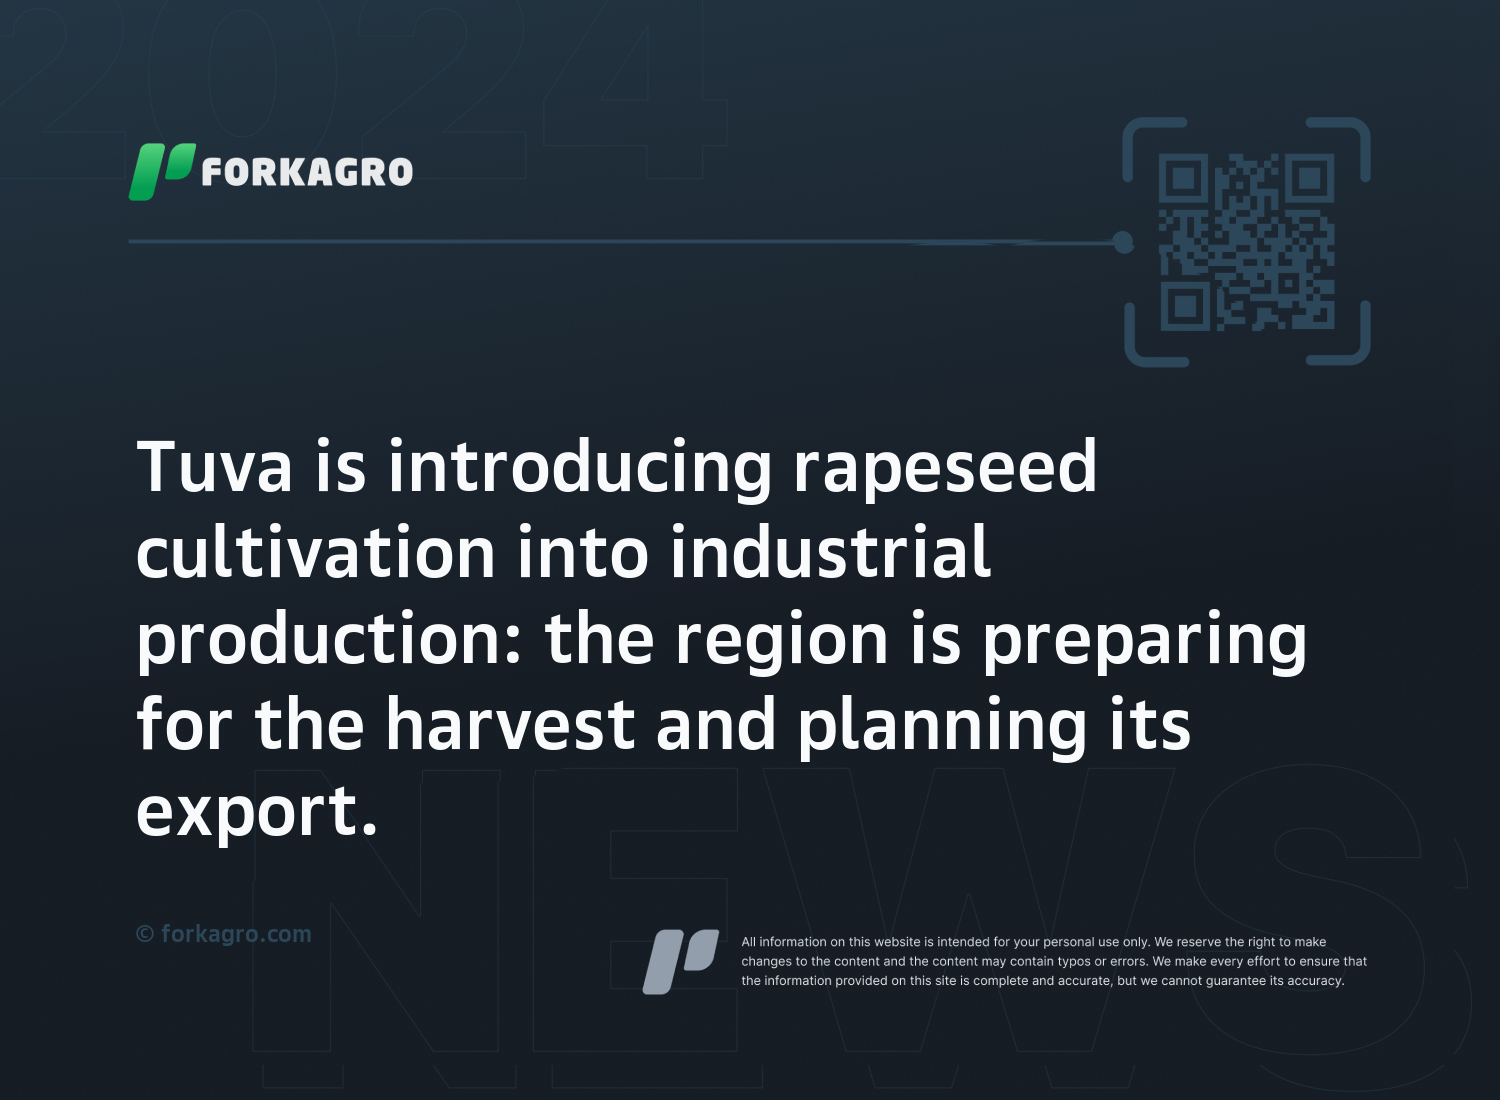 Tuva is introducing rapeseed cultivation into industrial production: the region is preparing for the harvest and planning its export.